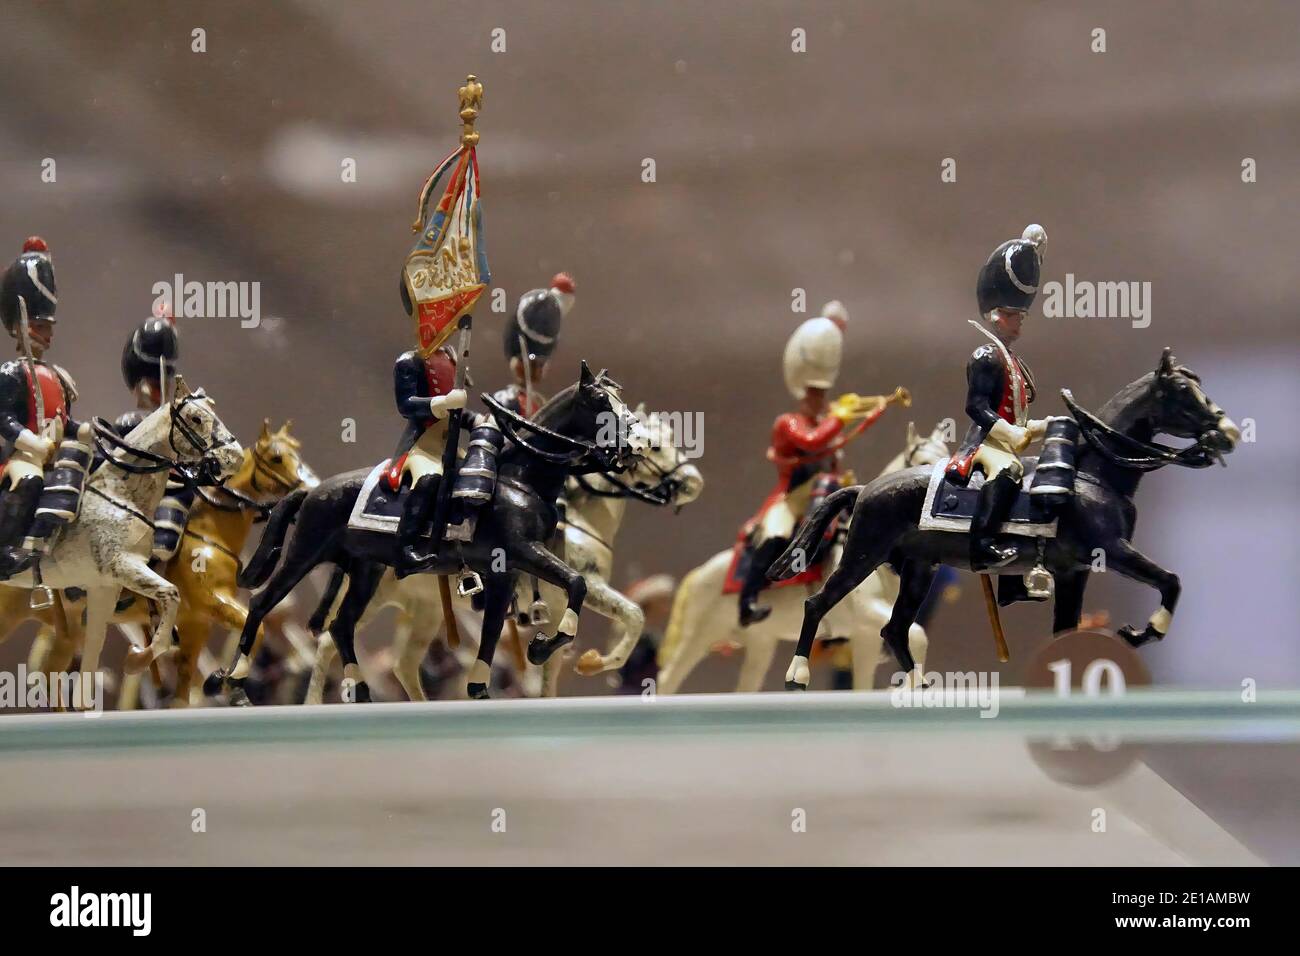 PARIS - DEC 5, 2018 - Cavalry miniature toy solider collection in  Les Invalides Army Museum, Paris, France Stock Photo